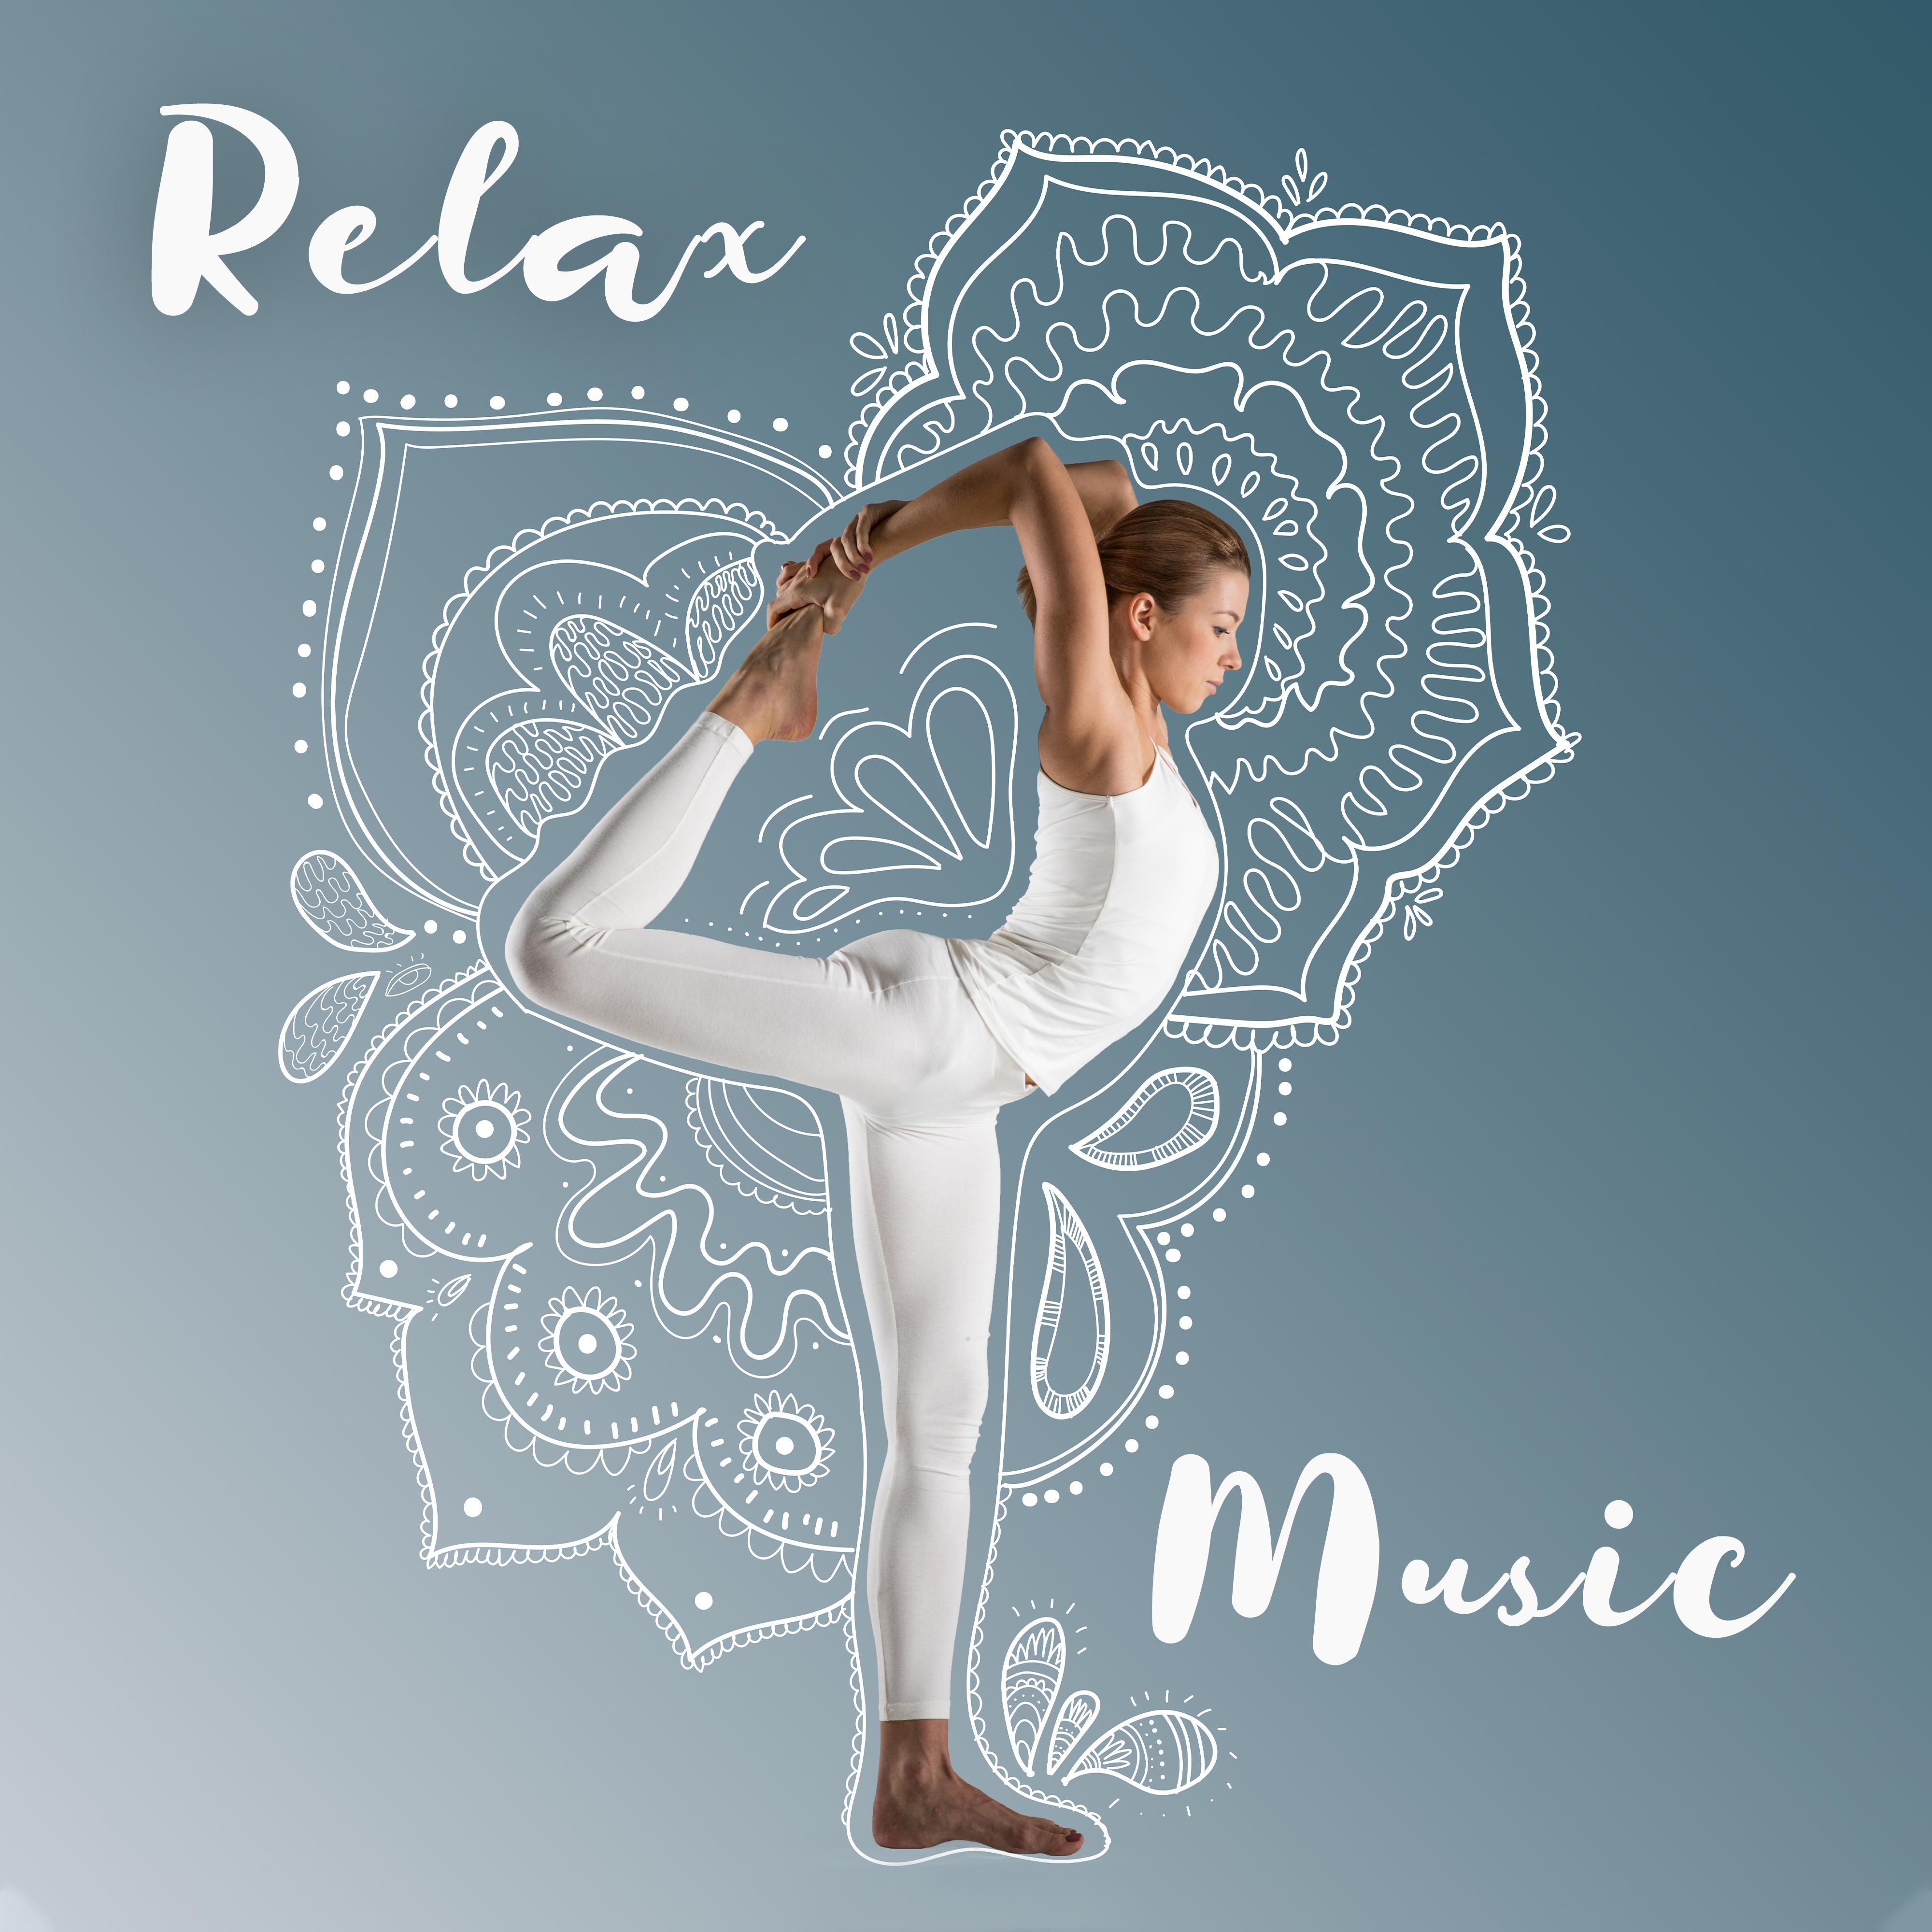 Relax Music: Relaxing Sounds for Yoga, Deep Meditation, Mindfulness Relaxation, Music Zone, Meditation Mindfulness Songs, Inner Balance, Lounge, Ambient Music